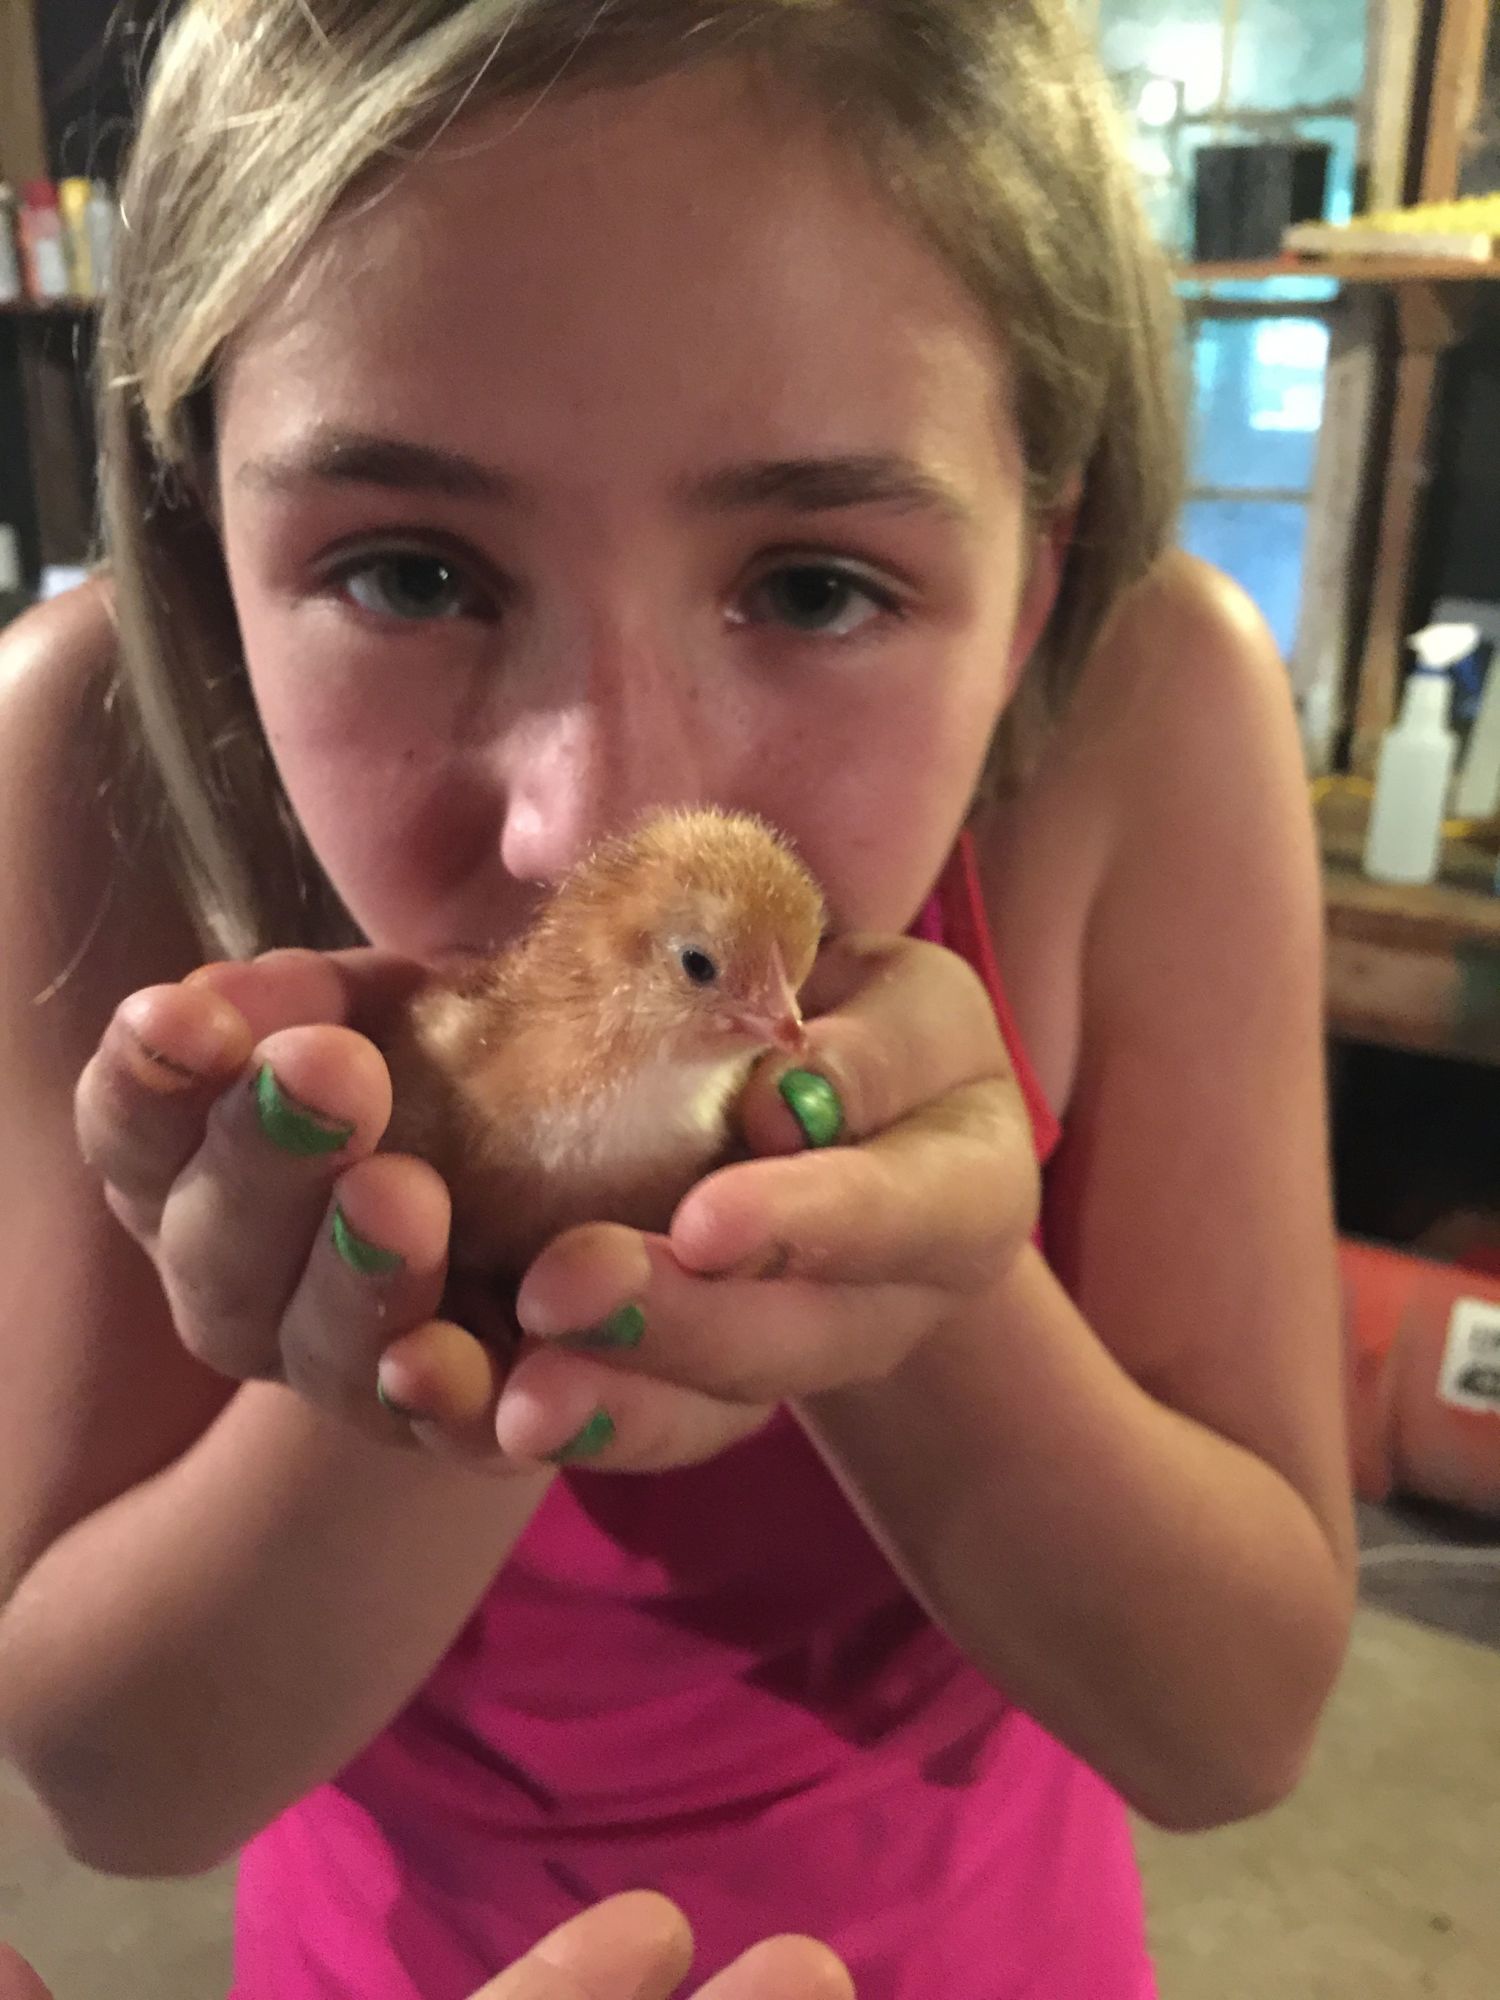 IMG I'm in in the May hatch along! We are new to the hatching and this is our 1st ever chick to hatch! We are super excited! He had this one in the incubator there are 3 more possibilities and 6 that were not fertile. This is my granddaughter Abbie, she was with me when we found it! It was awesome to share that experience with her!!!! These are the 1st contests I've enter and I'm actually enjoying them! Thank y'all!